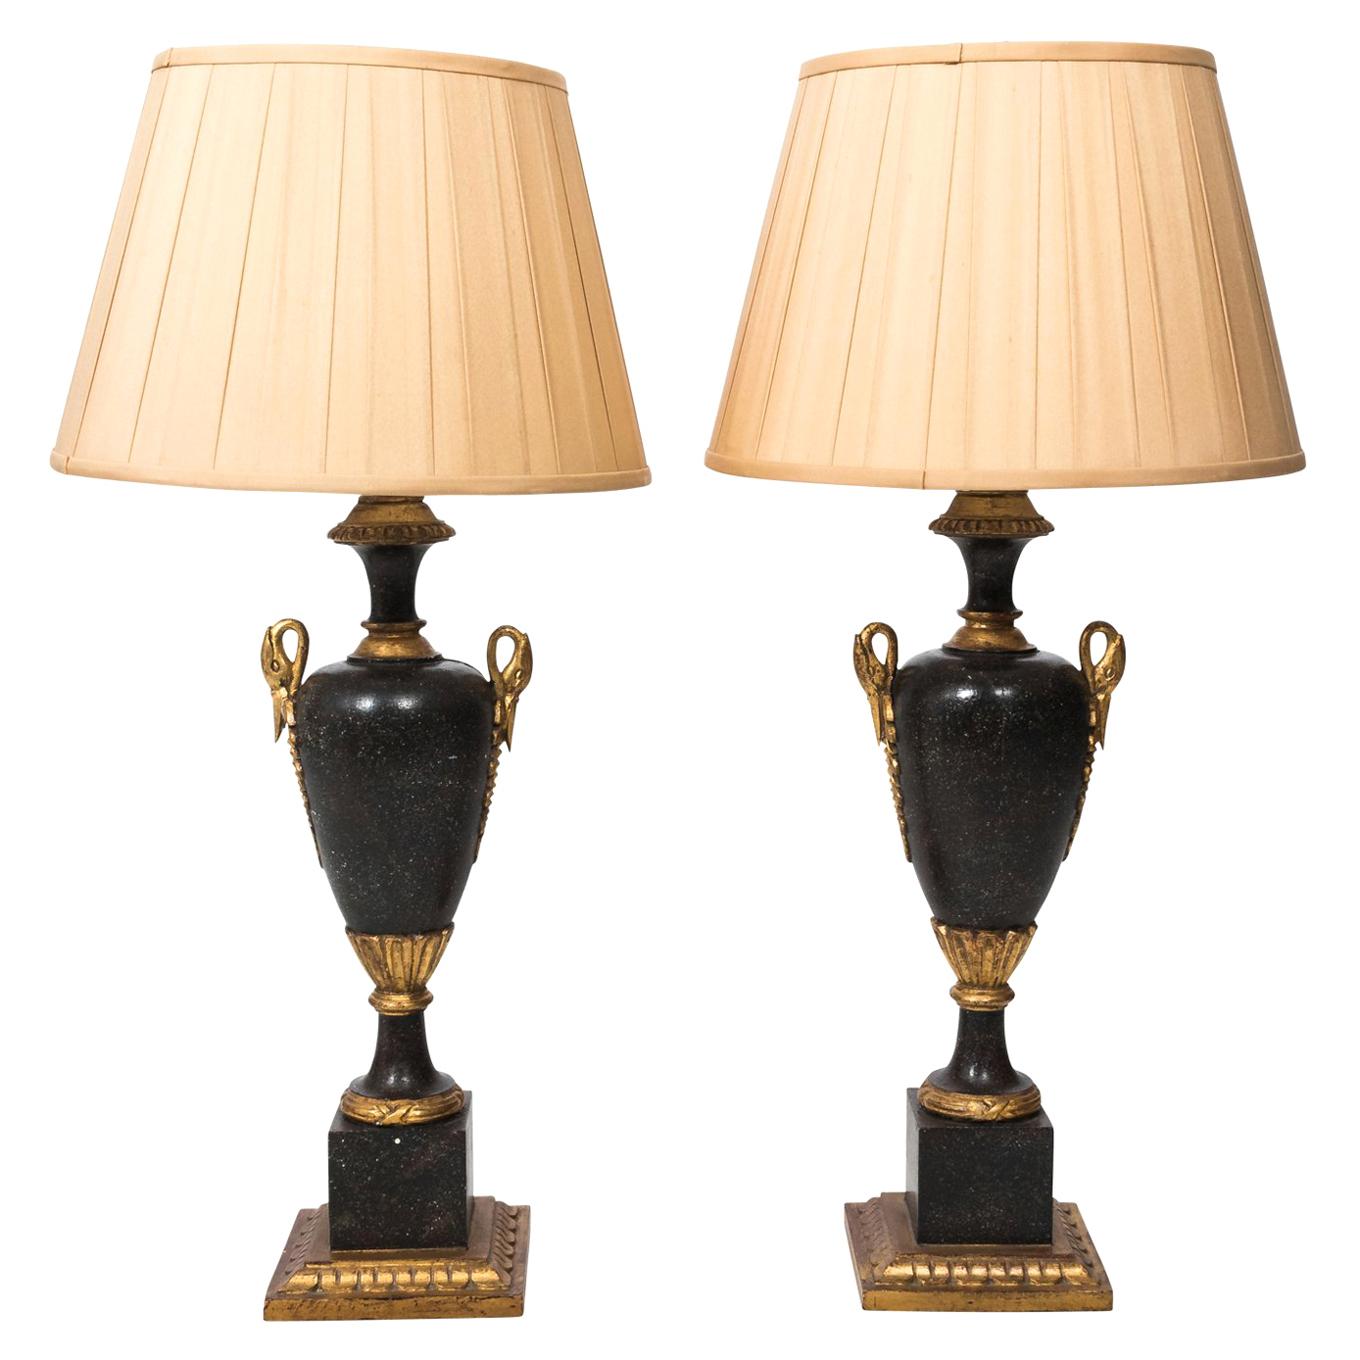 Pair of Urn Shaped Lamps